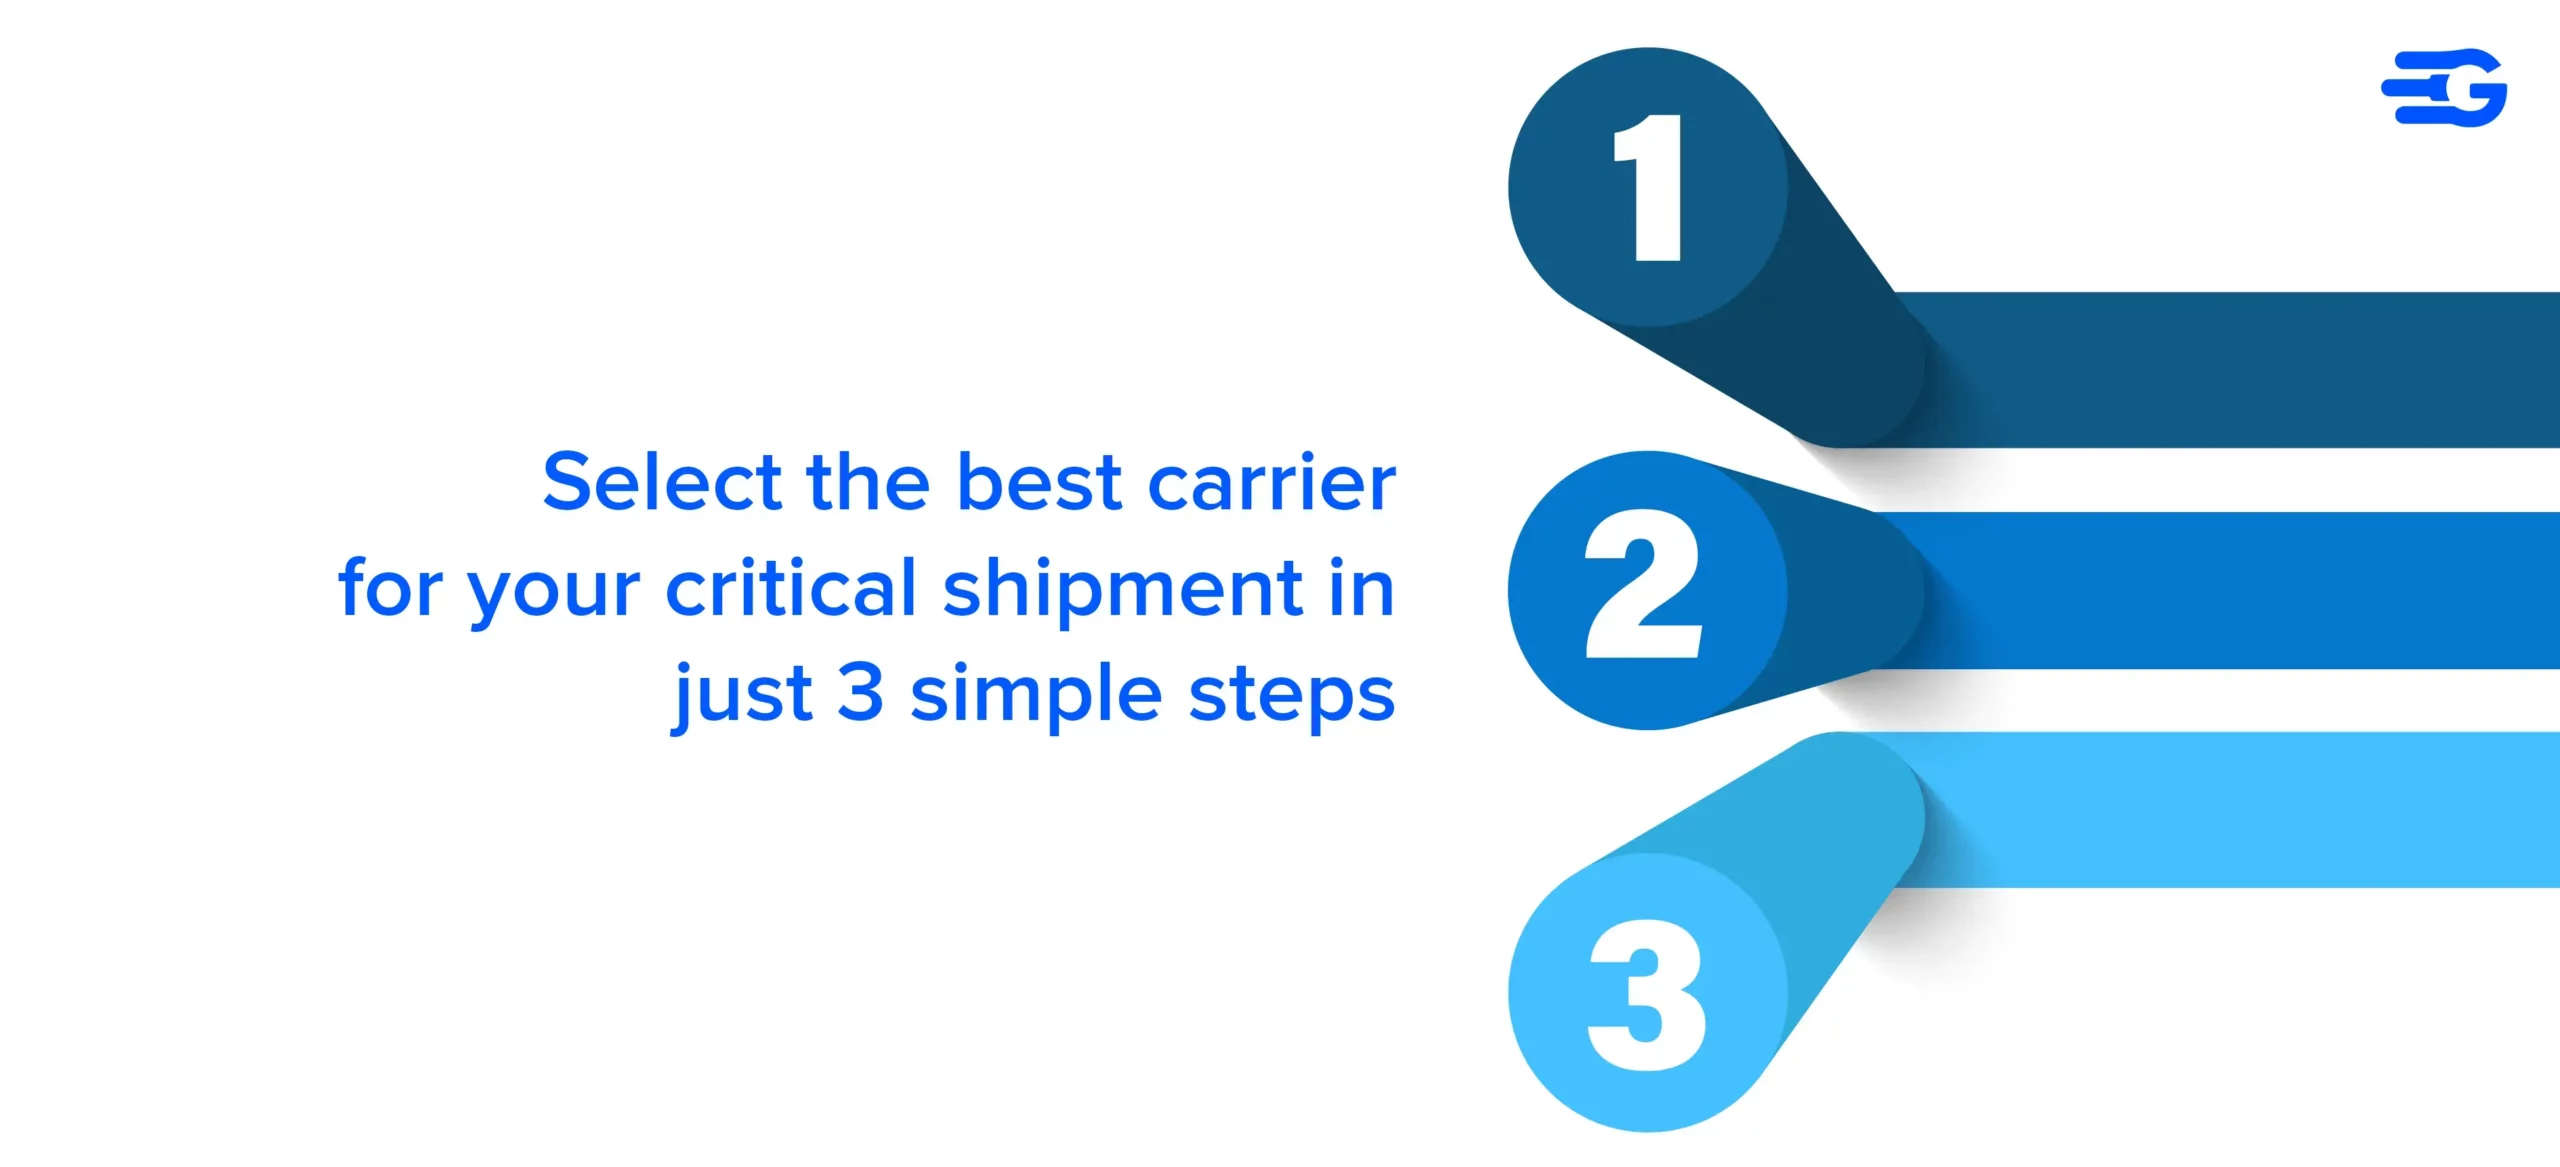 Select the best carrier for your critical shipment in just 3 simple step